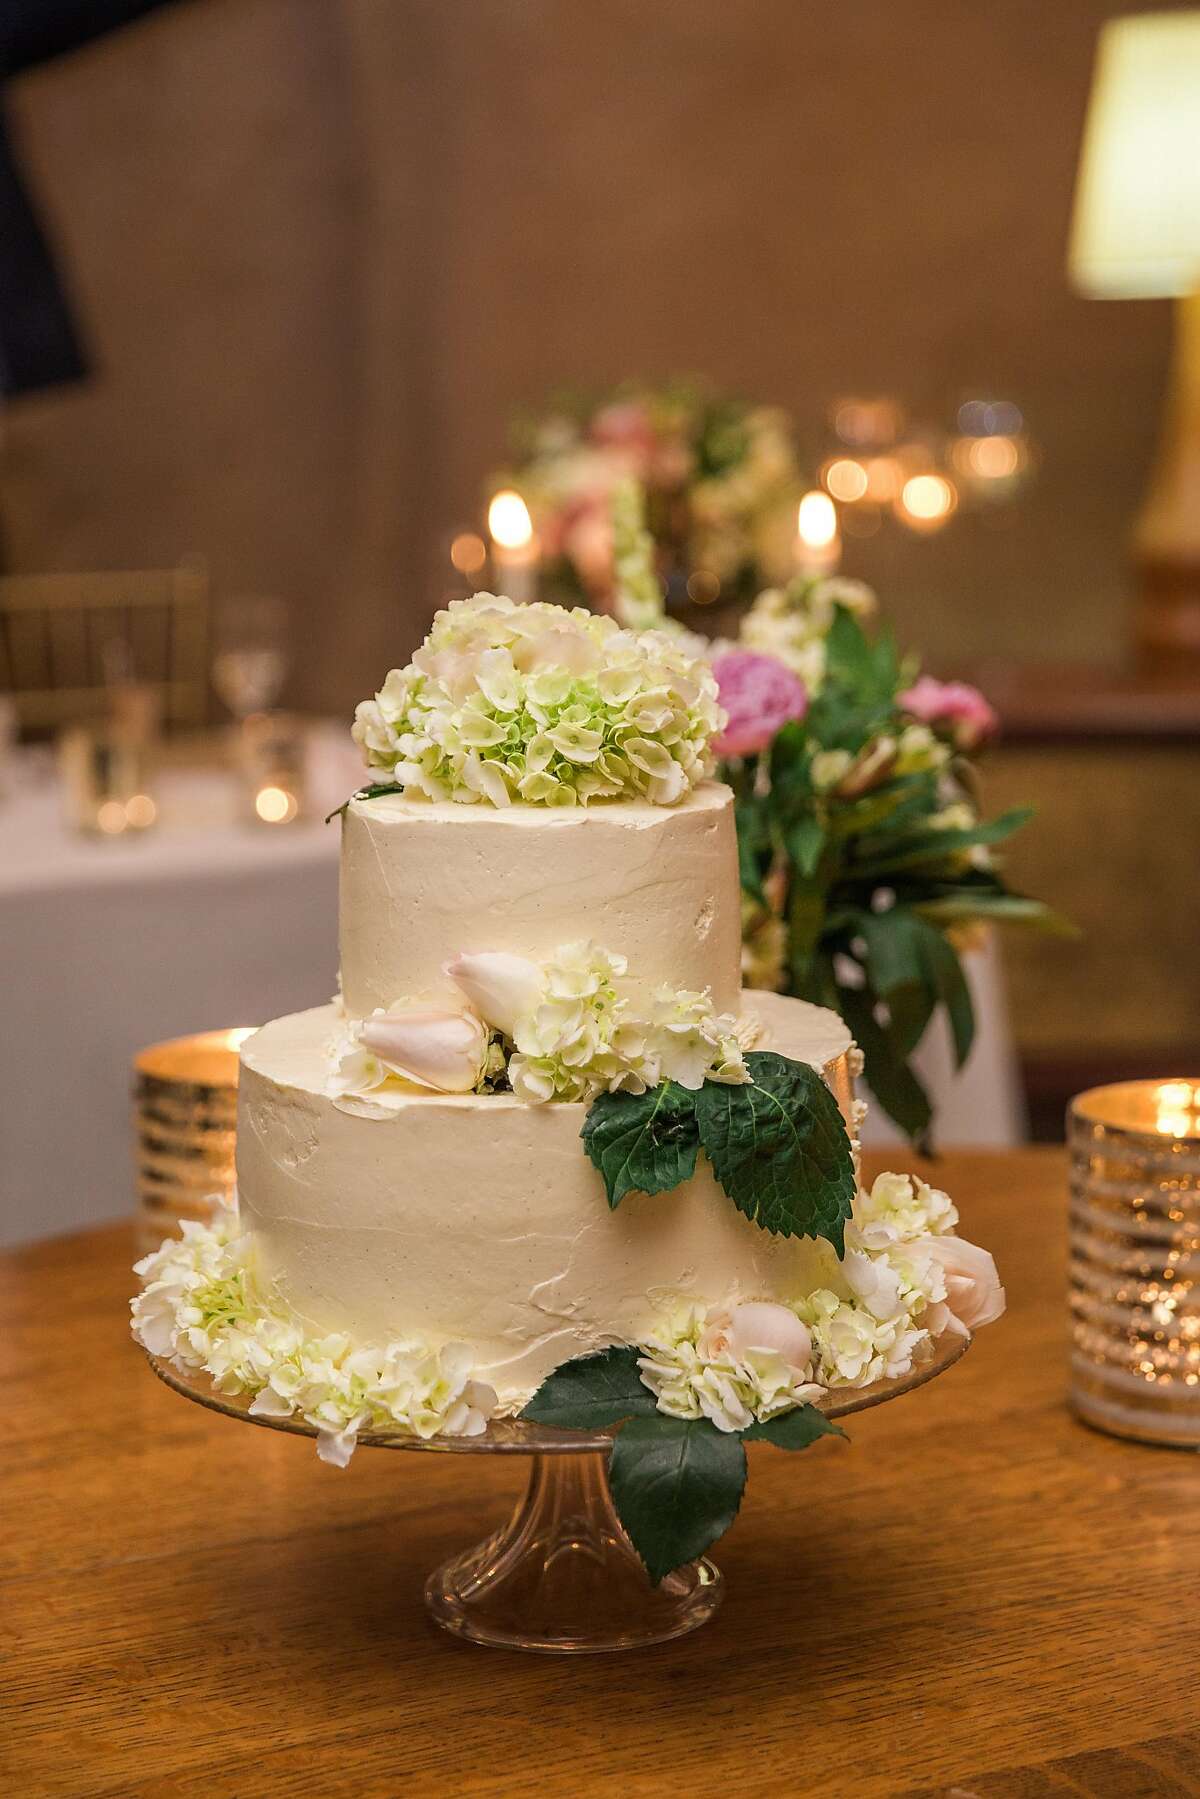 For their June 26 Napa wedding, they easily agreed on the private venue. Trish�s mother helped make traditional dishes from their Burmese heritage using family recipes for the post-ceremony dinner. Adam�s mother, known for her baking prowess, made the tiered cake; his father officiated.